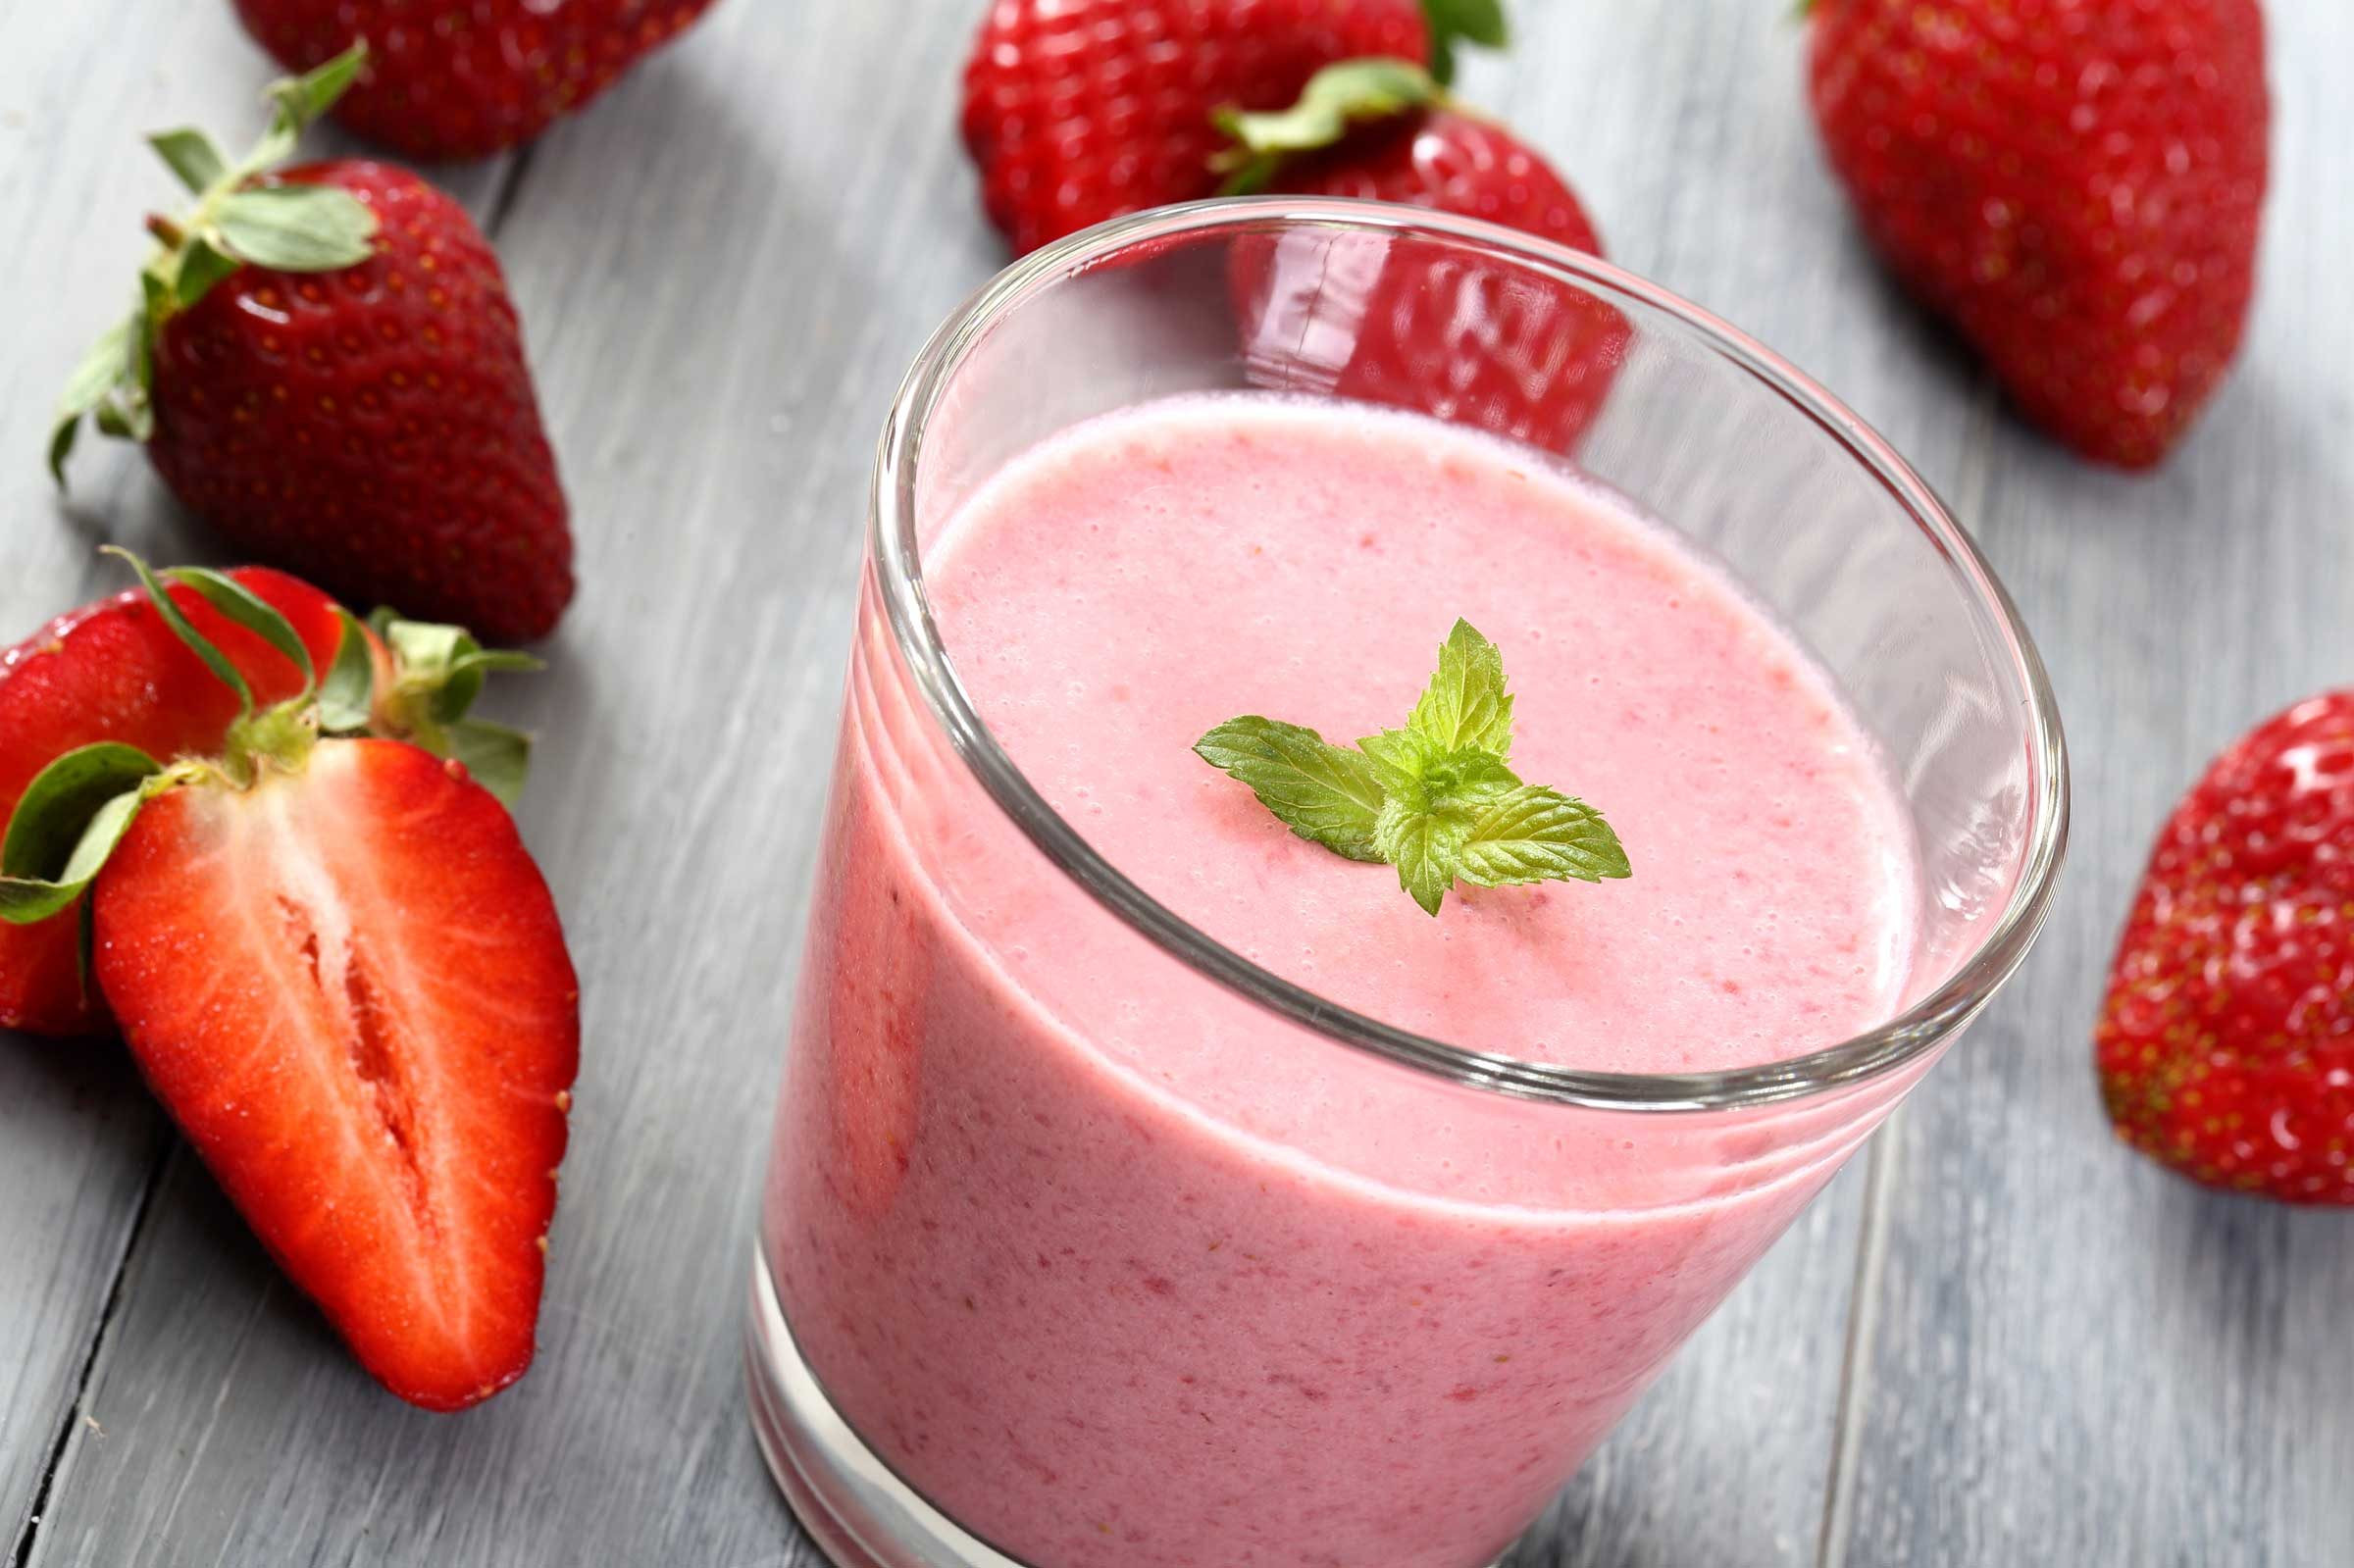 Yogurt Fruit Smoothies Recipes
 8 Healthy Fruit Smoothies for an Easy Breakfast